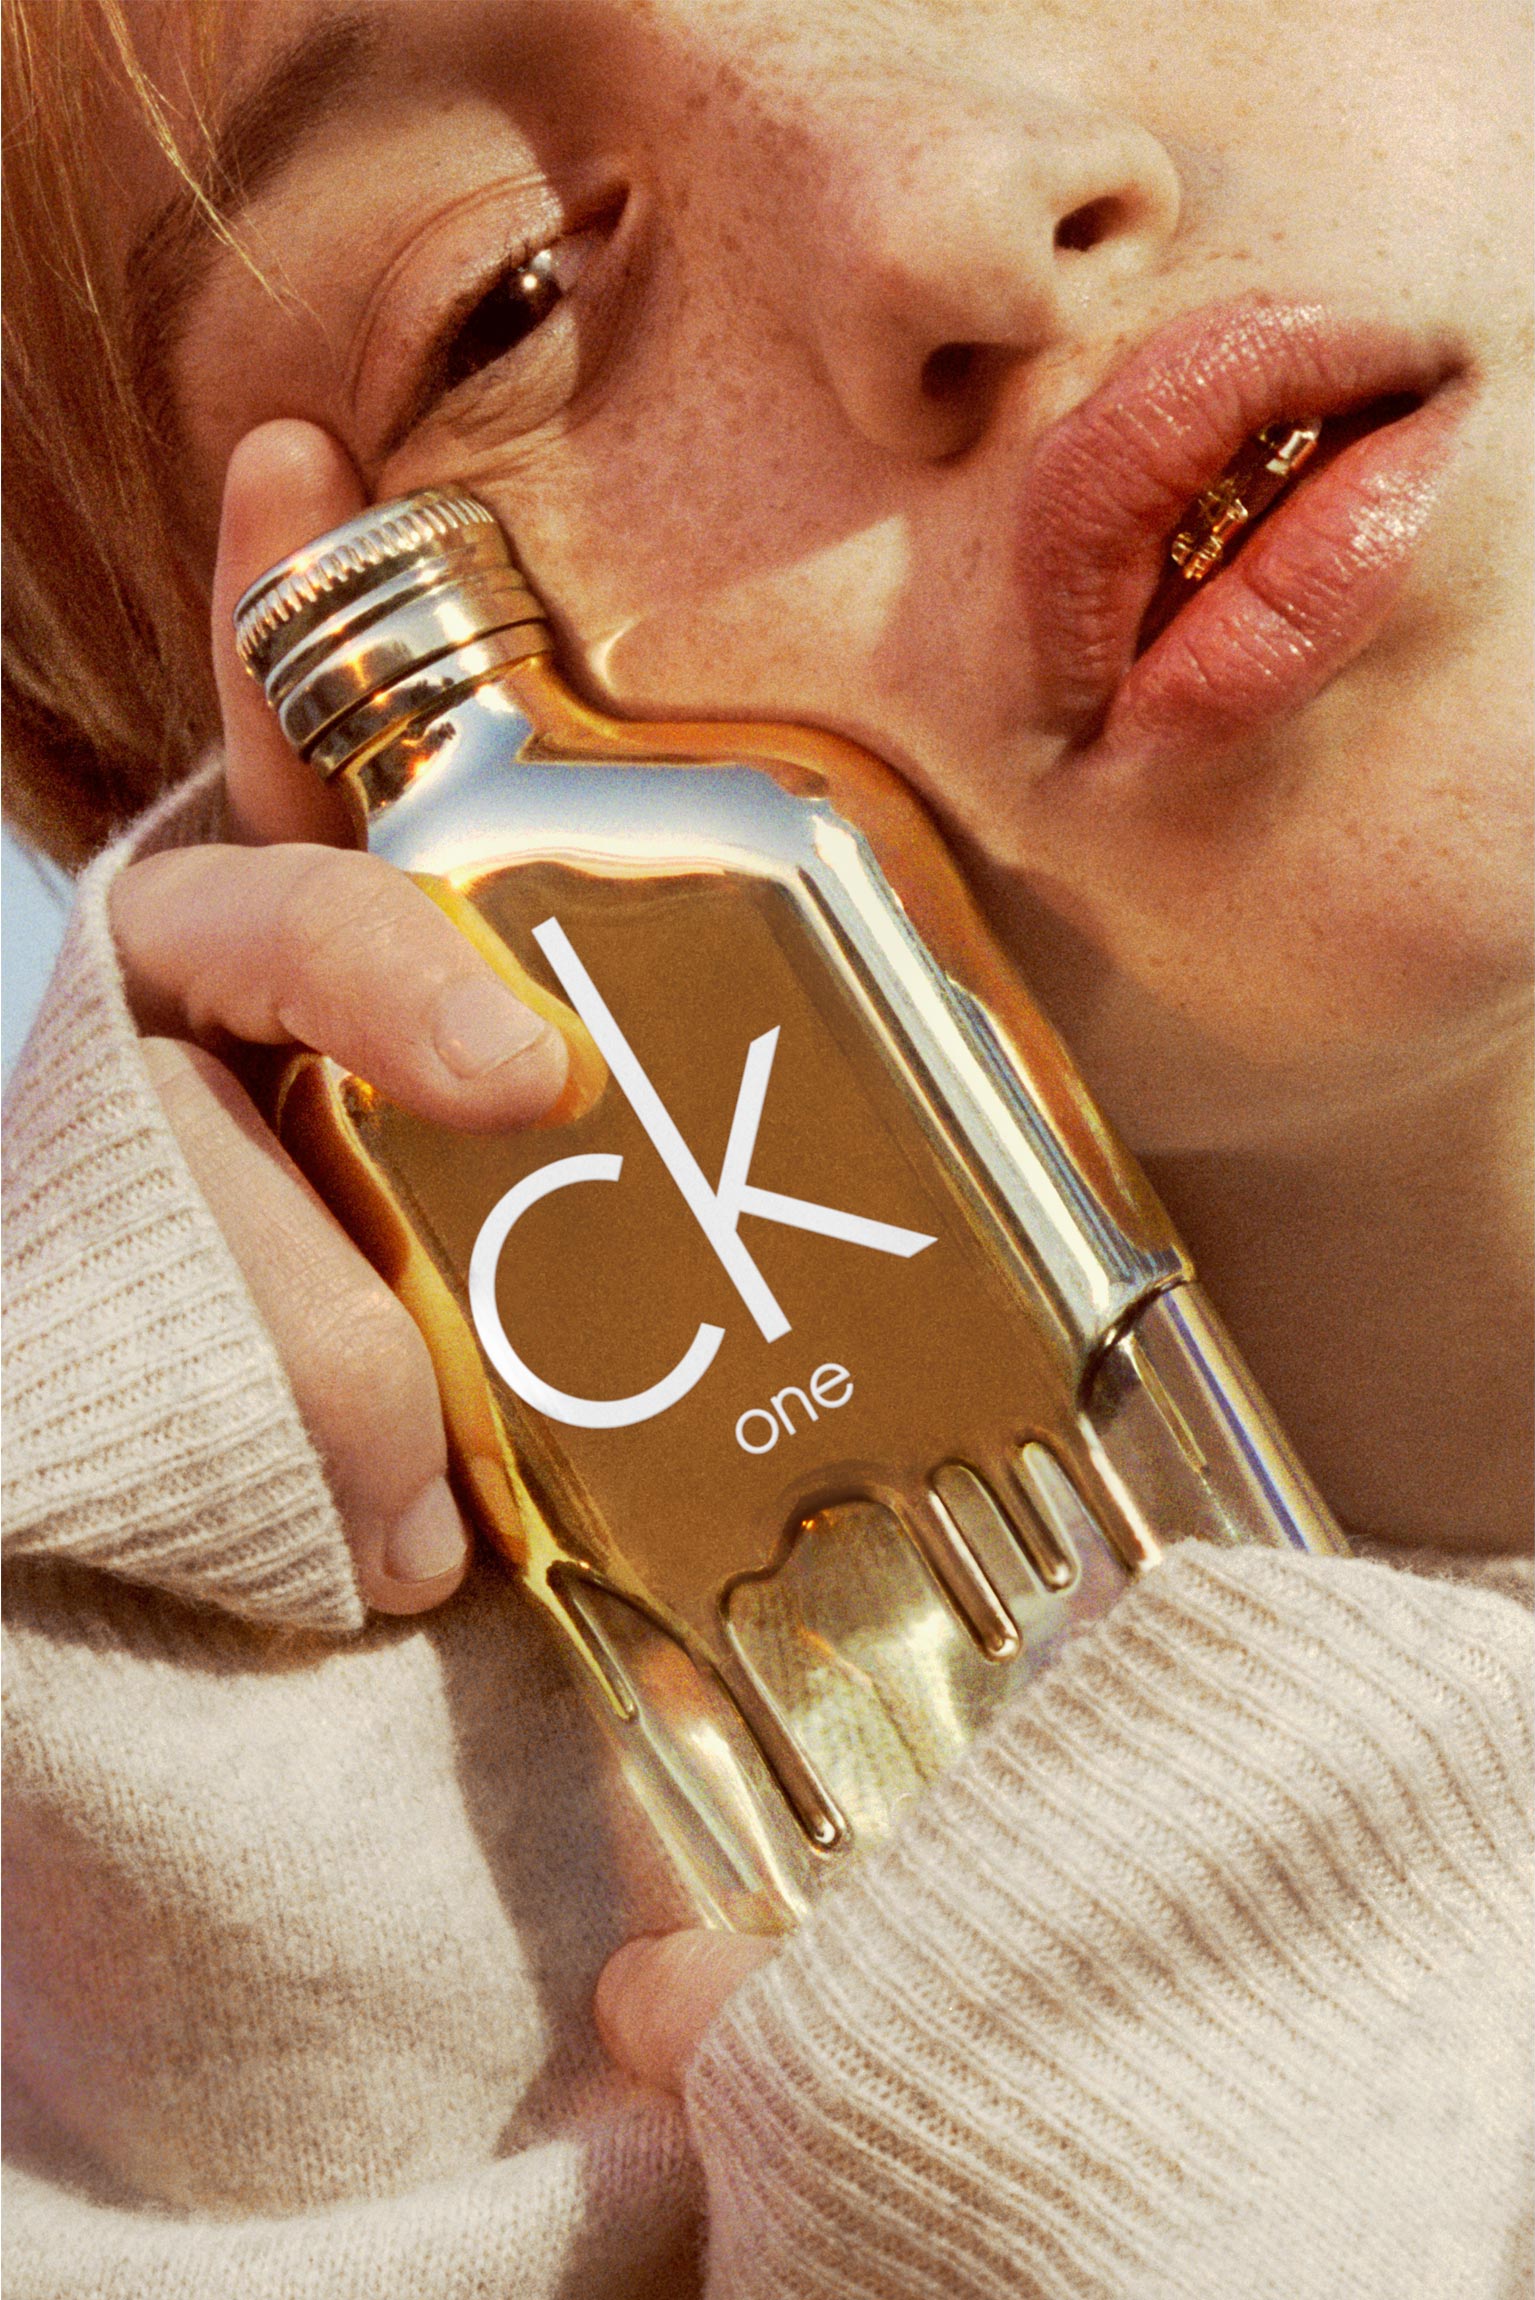 CK One Gold Calvin Klein perfume - a new fragrance for women and men 2016